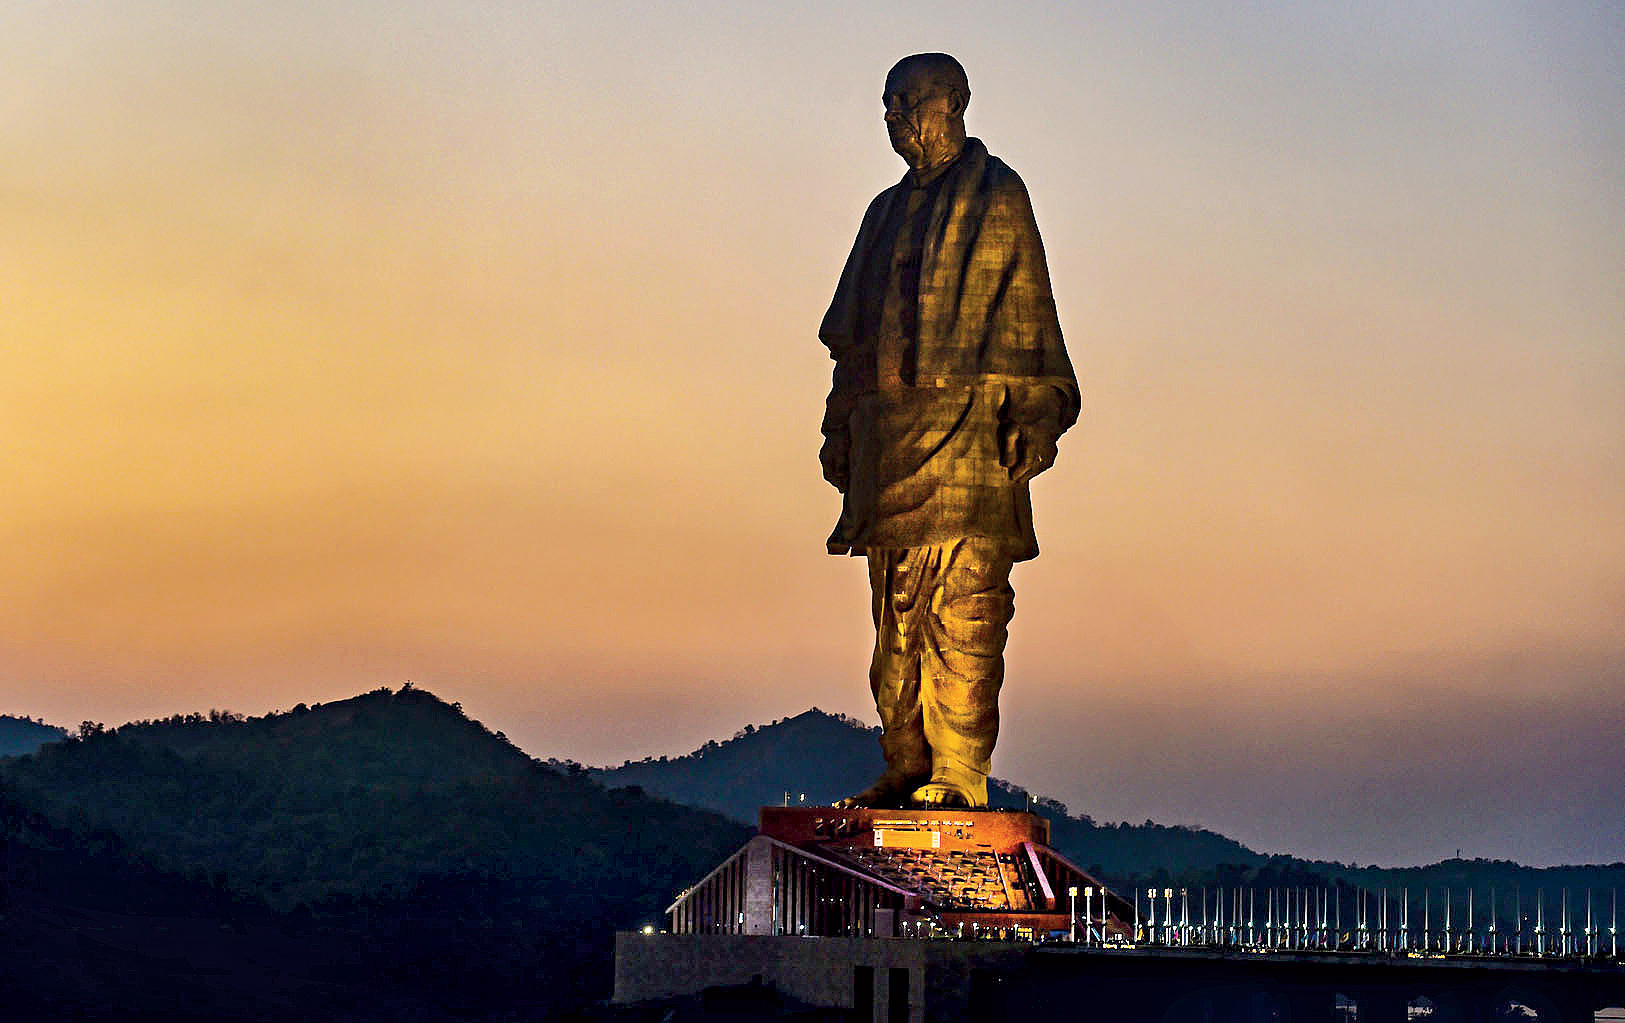 Statue of Unity | The Statue of Unity: An irony cast in stone ...